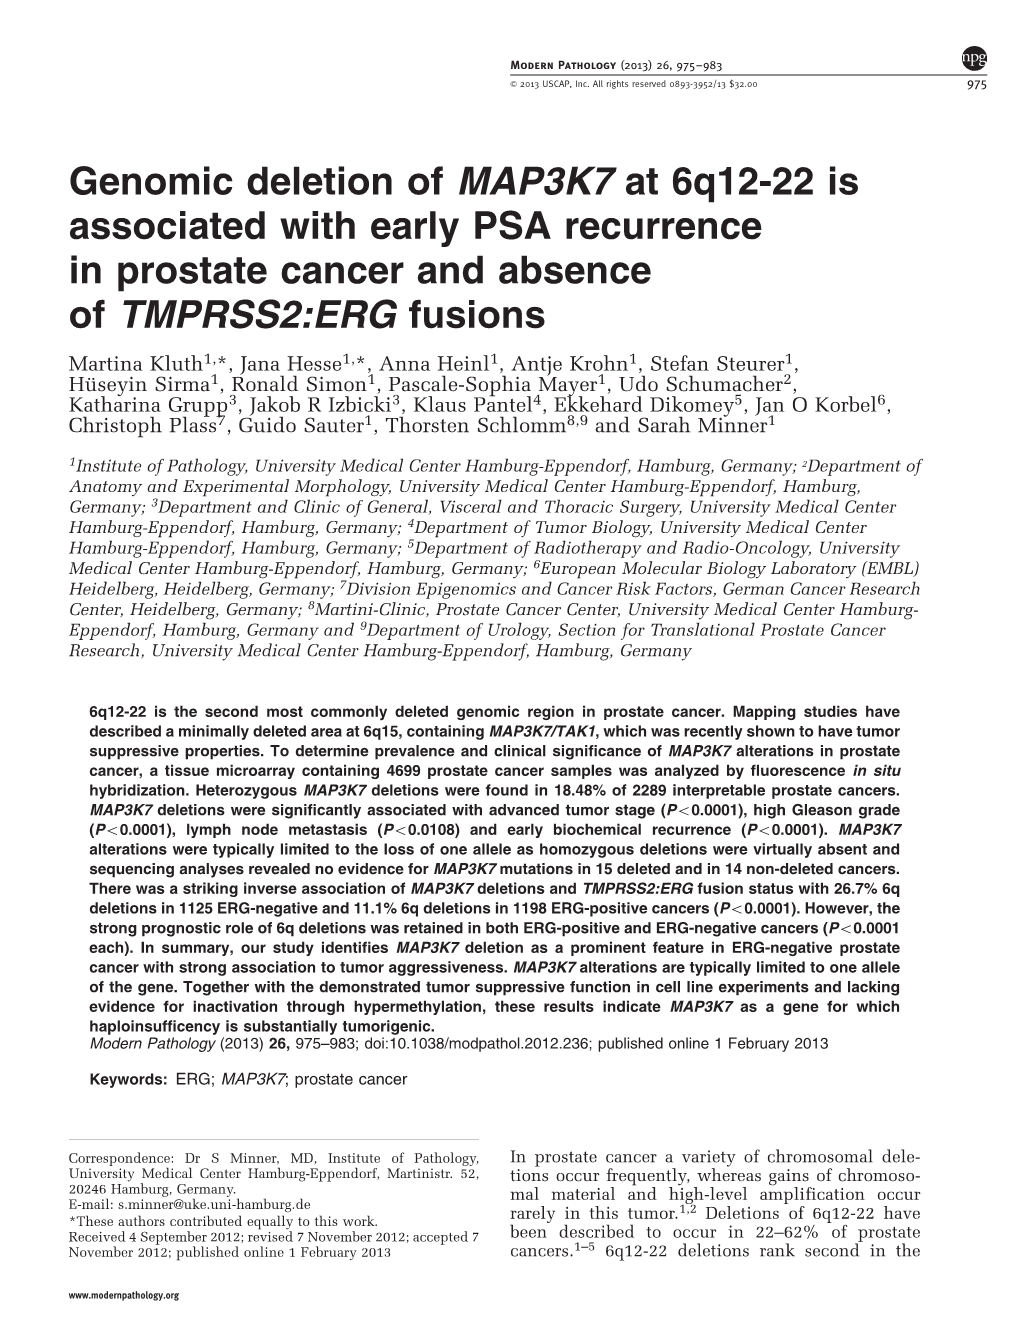 Genomic Deletion of MAP3K7 at 6Q12-22 Is Associated with Early